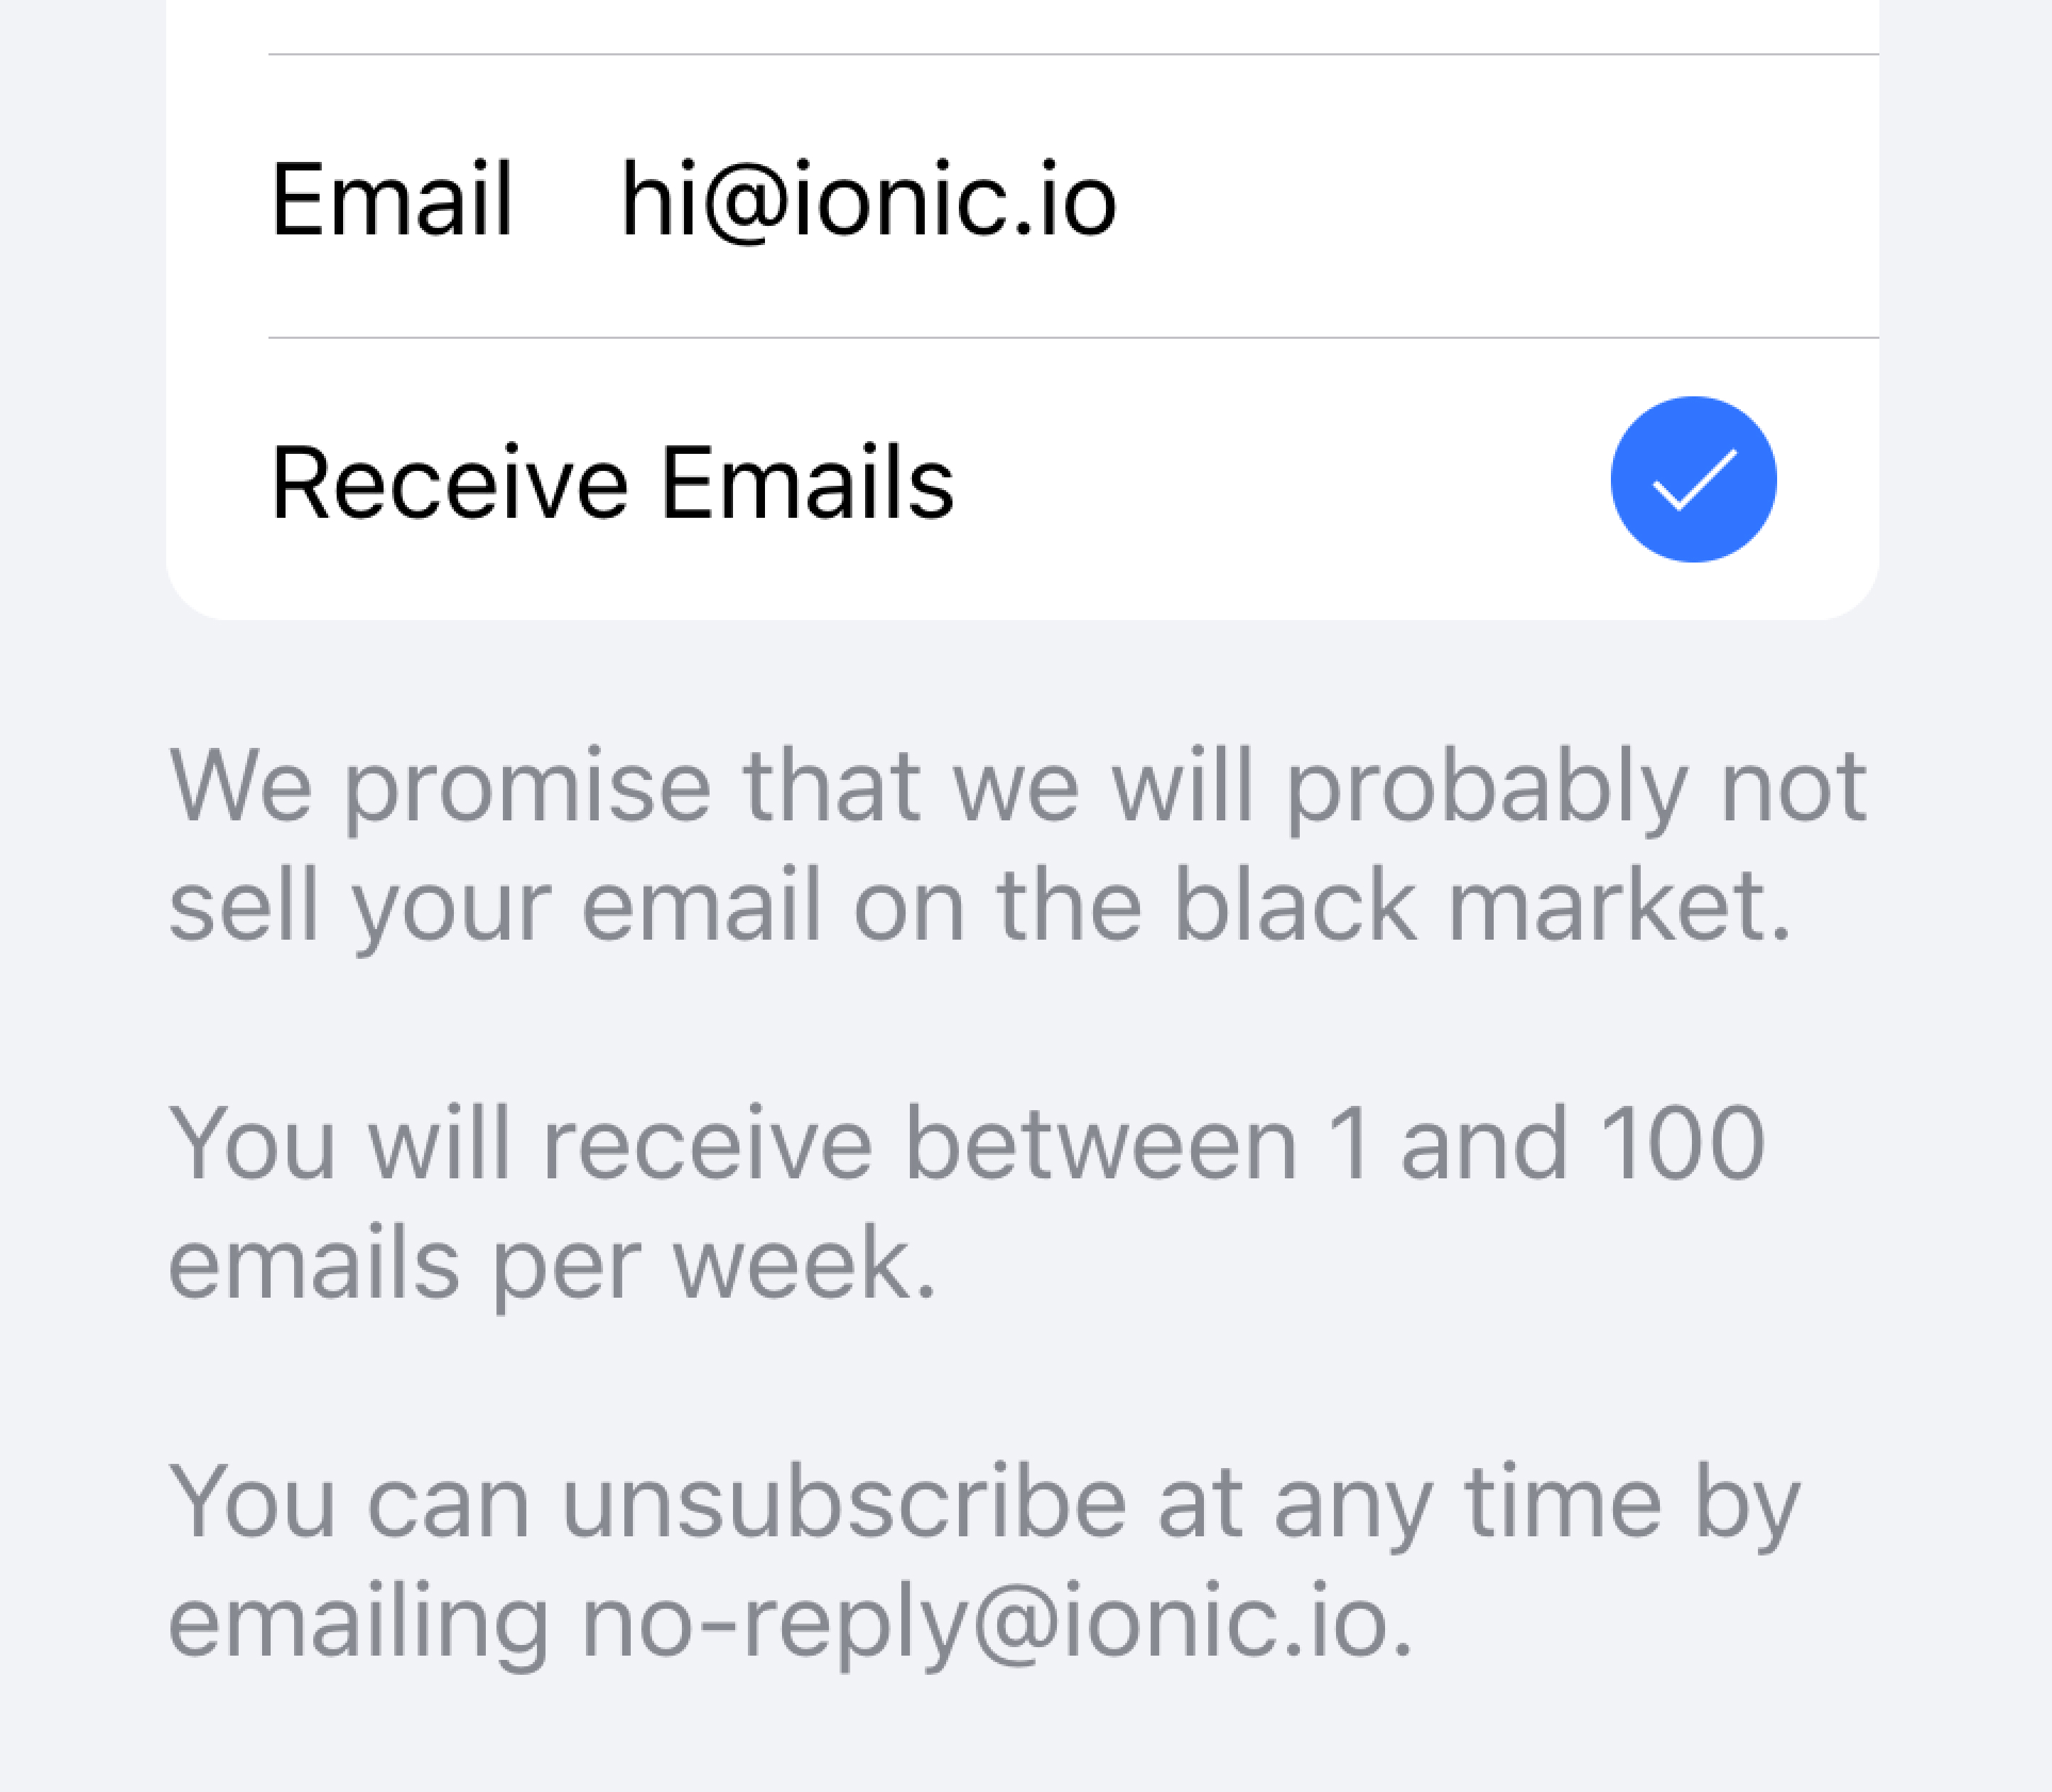 A list with an item that contains a checked checkbox indicating the user wants to receive emails. Text describing how often the user will receive emails as well as how to unsubscribe from emails is placed underneath the list.